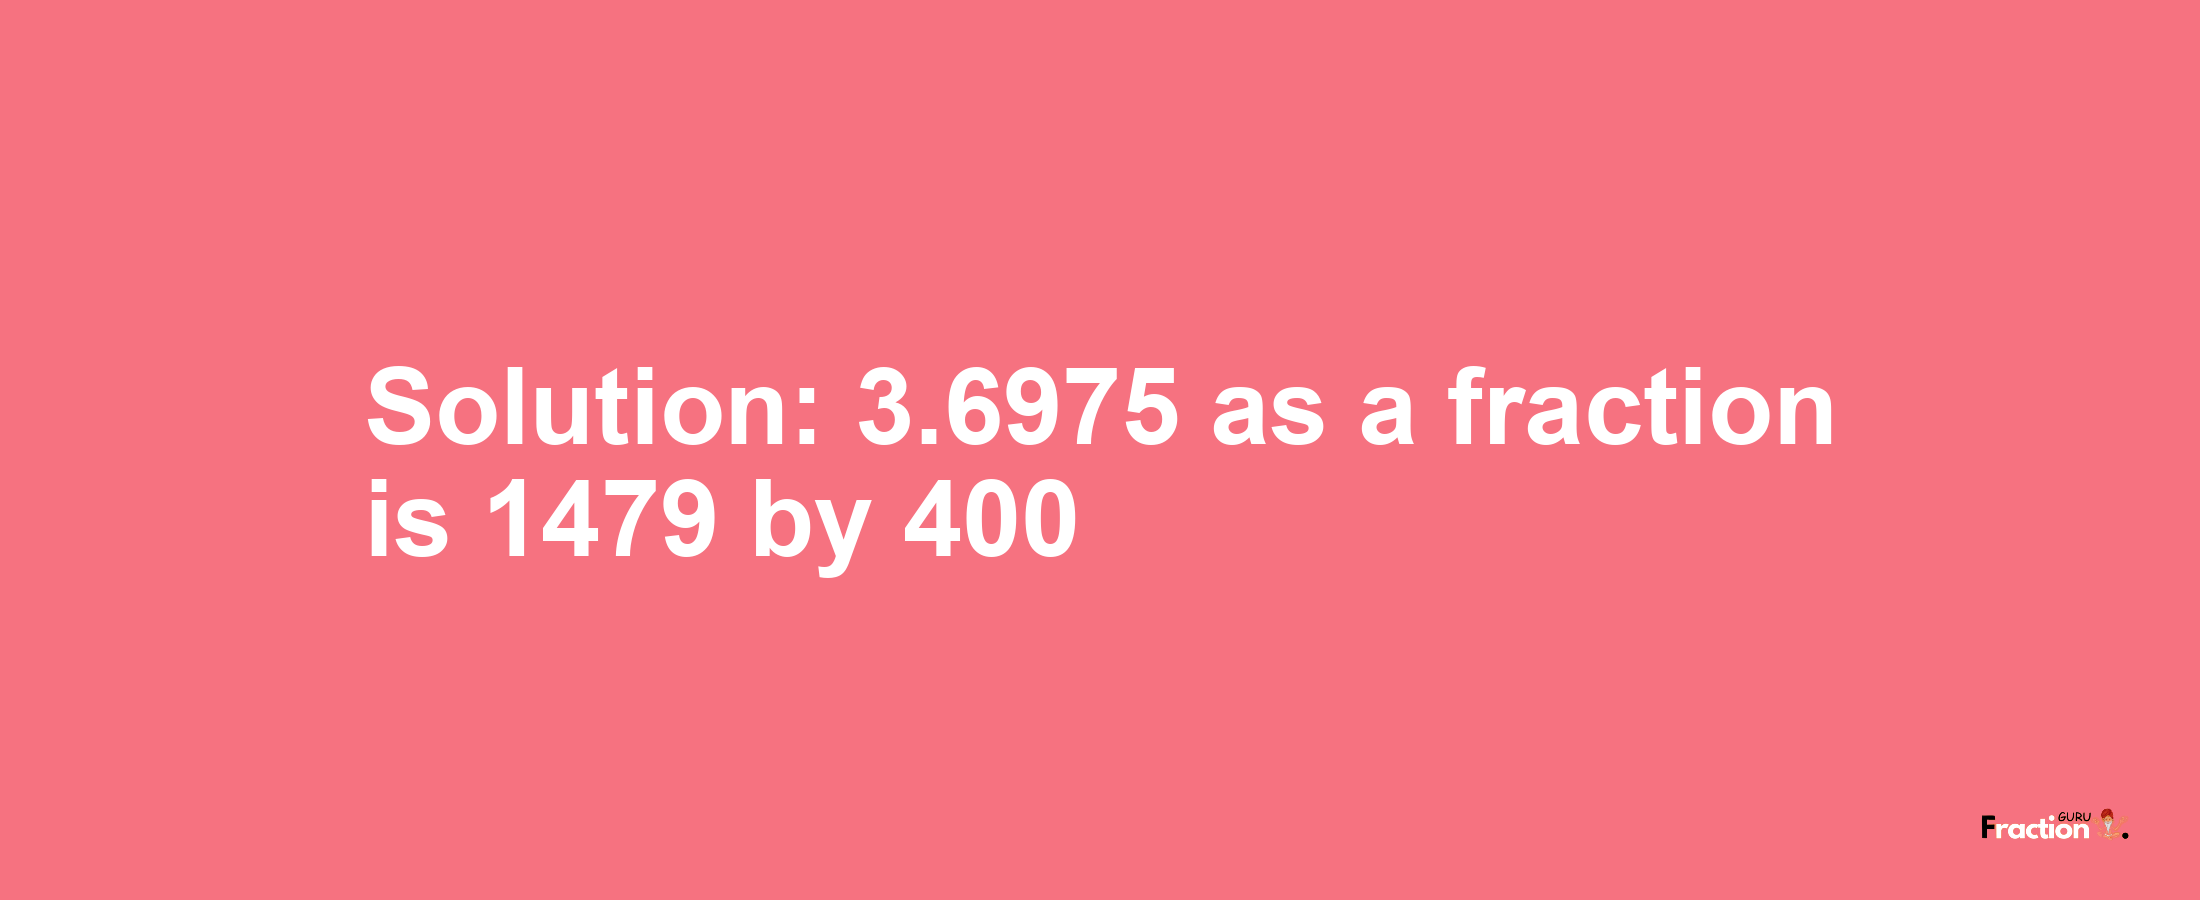 Solution:3.6975 as a fraction is 1479/400